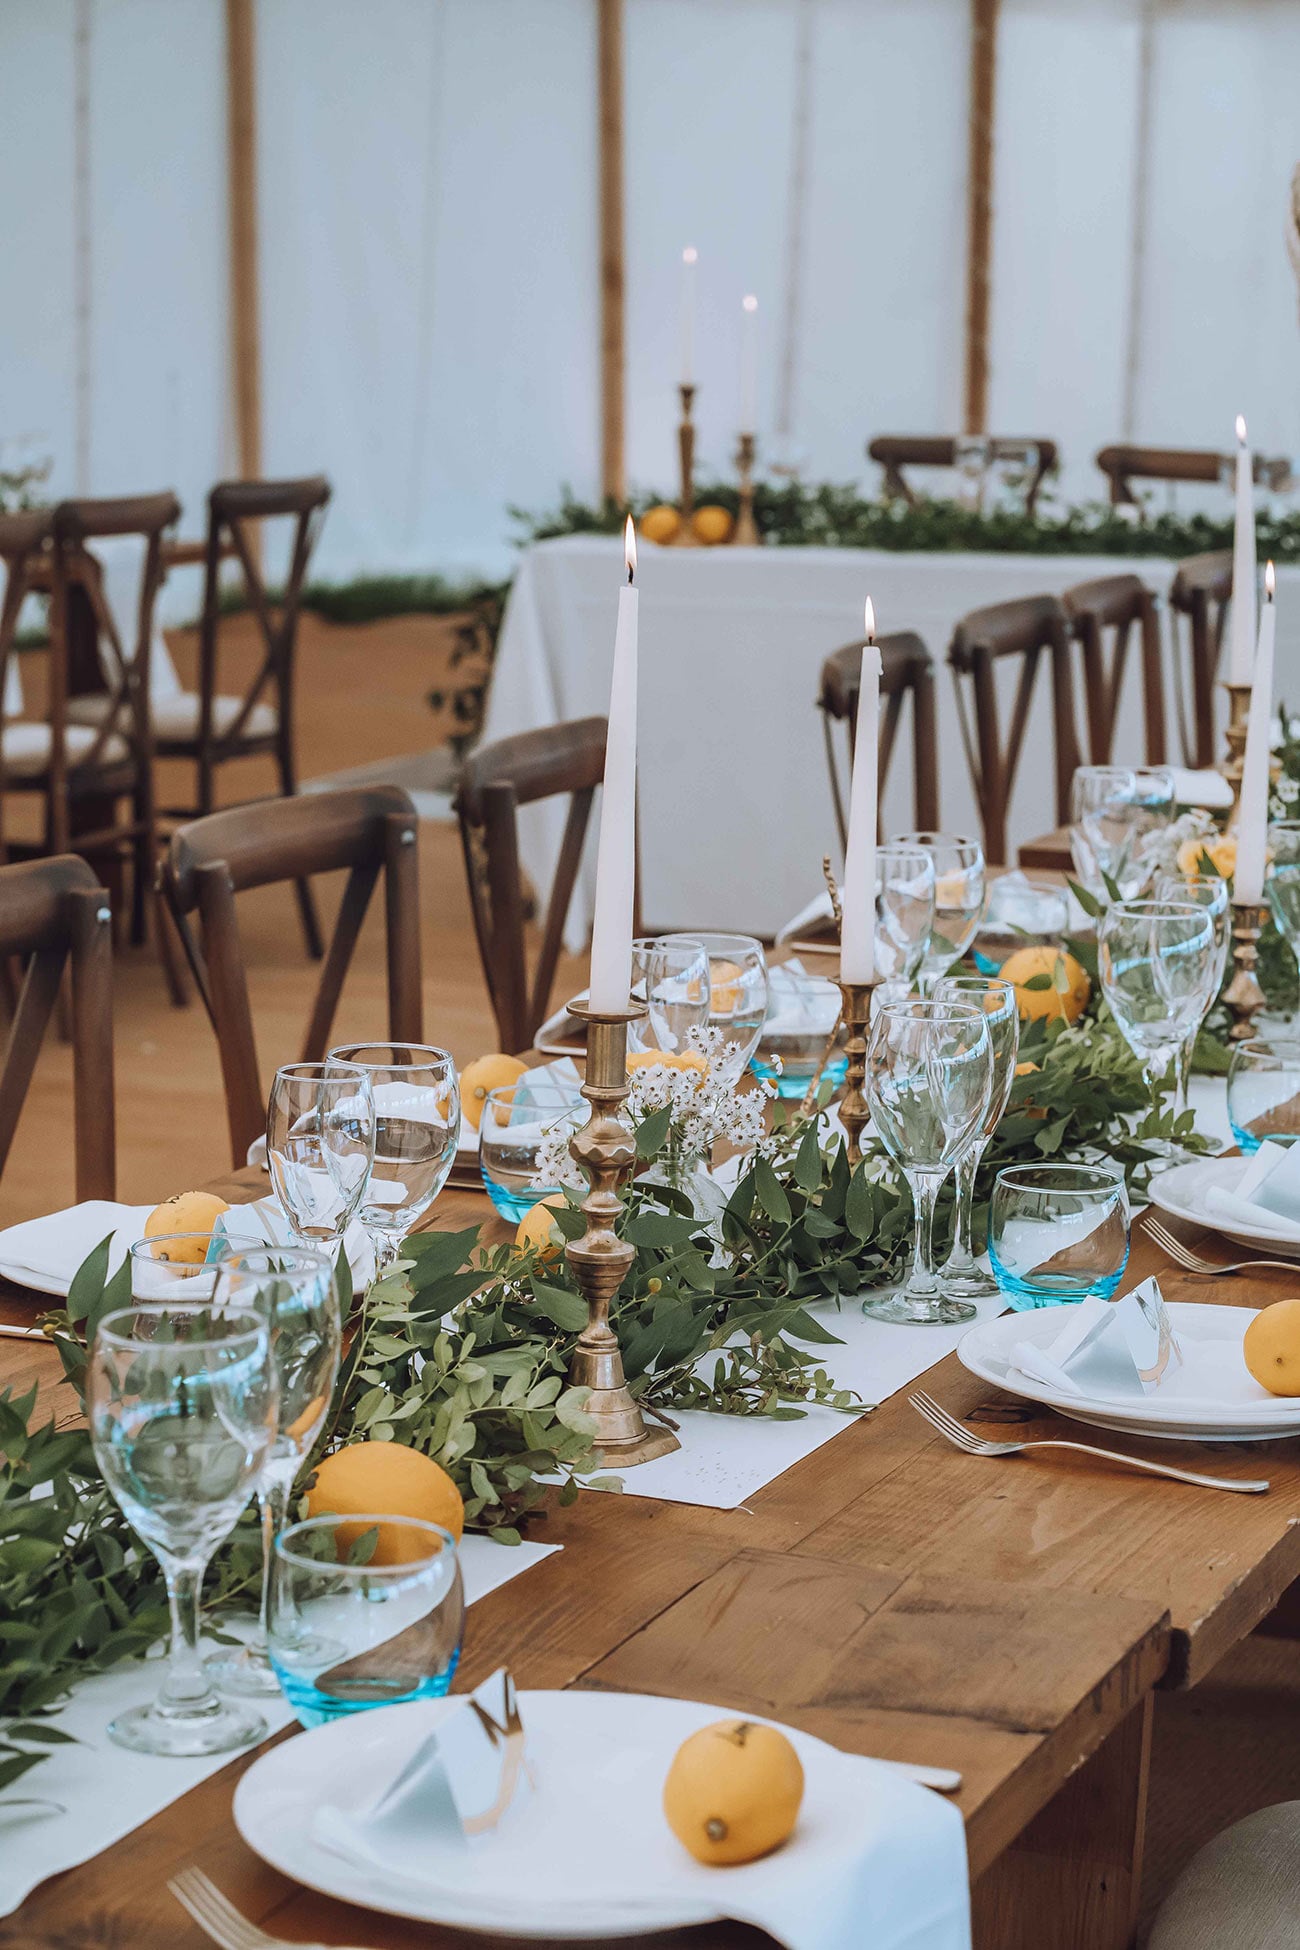 The stunning table setting with decorations of lemons and greenery